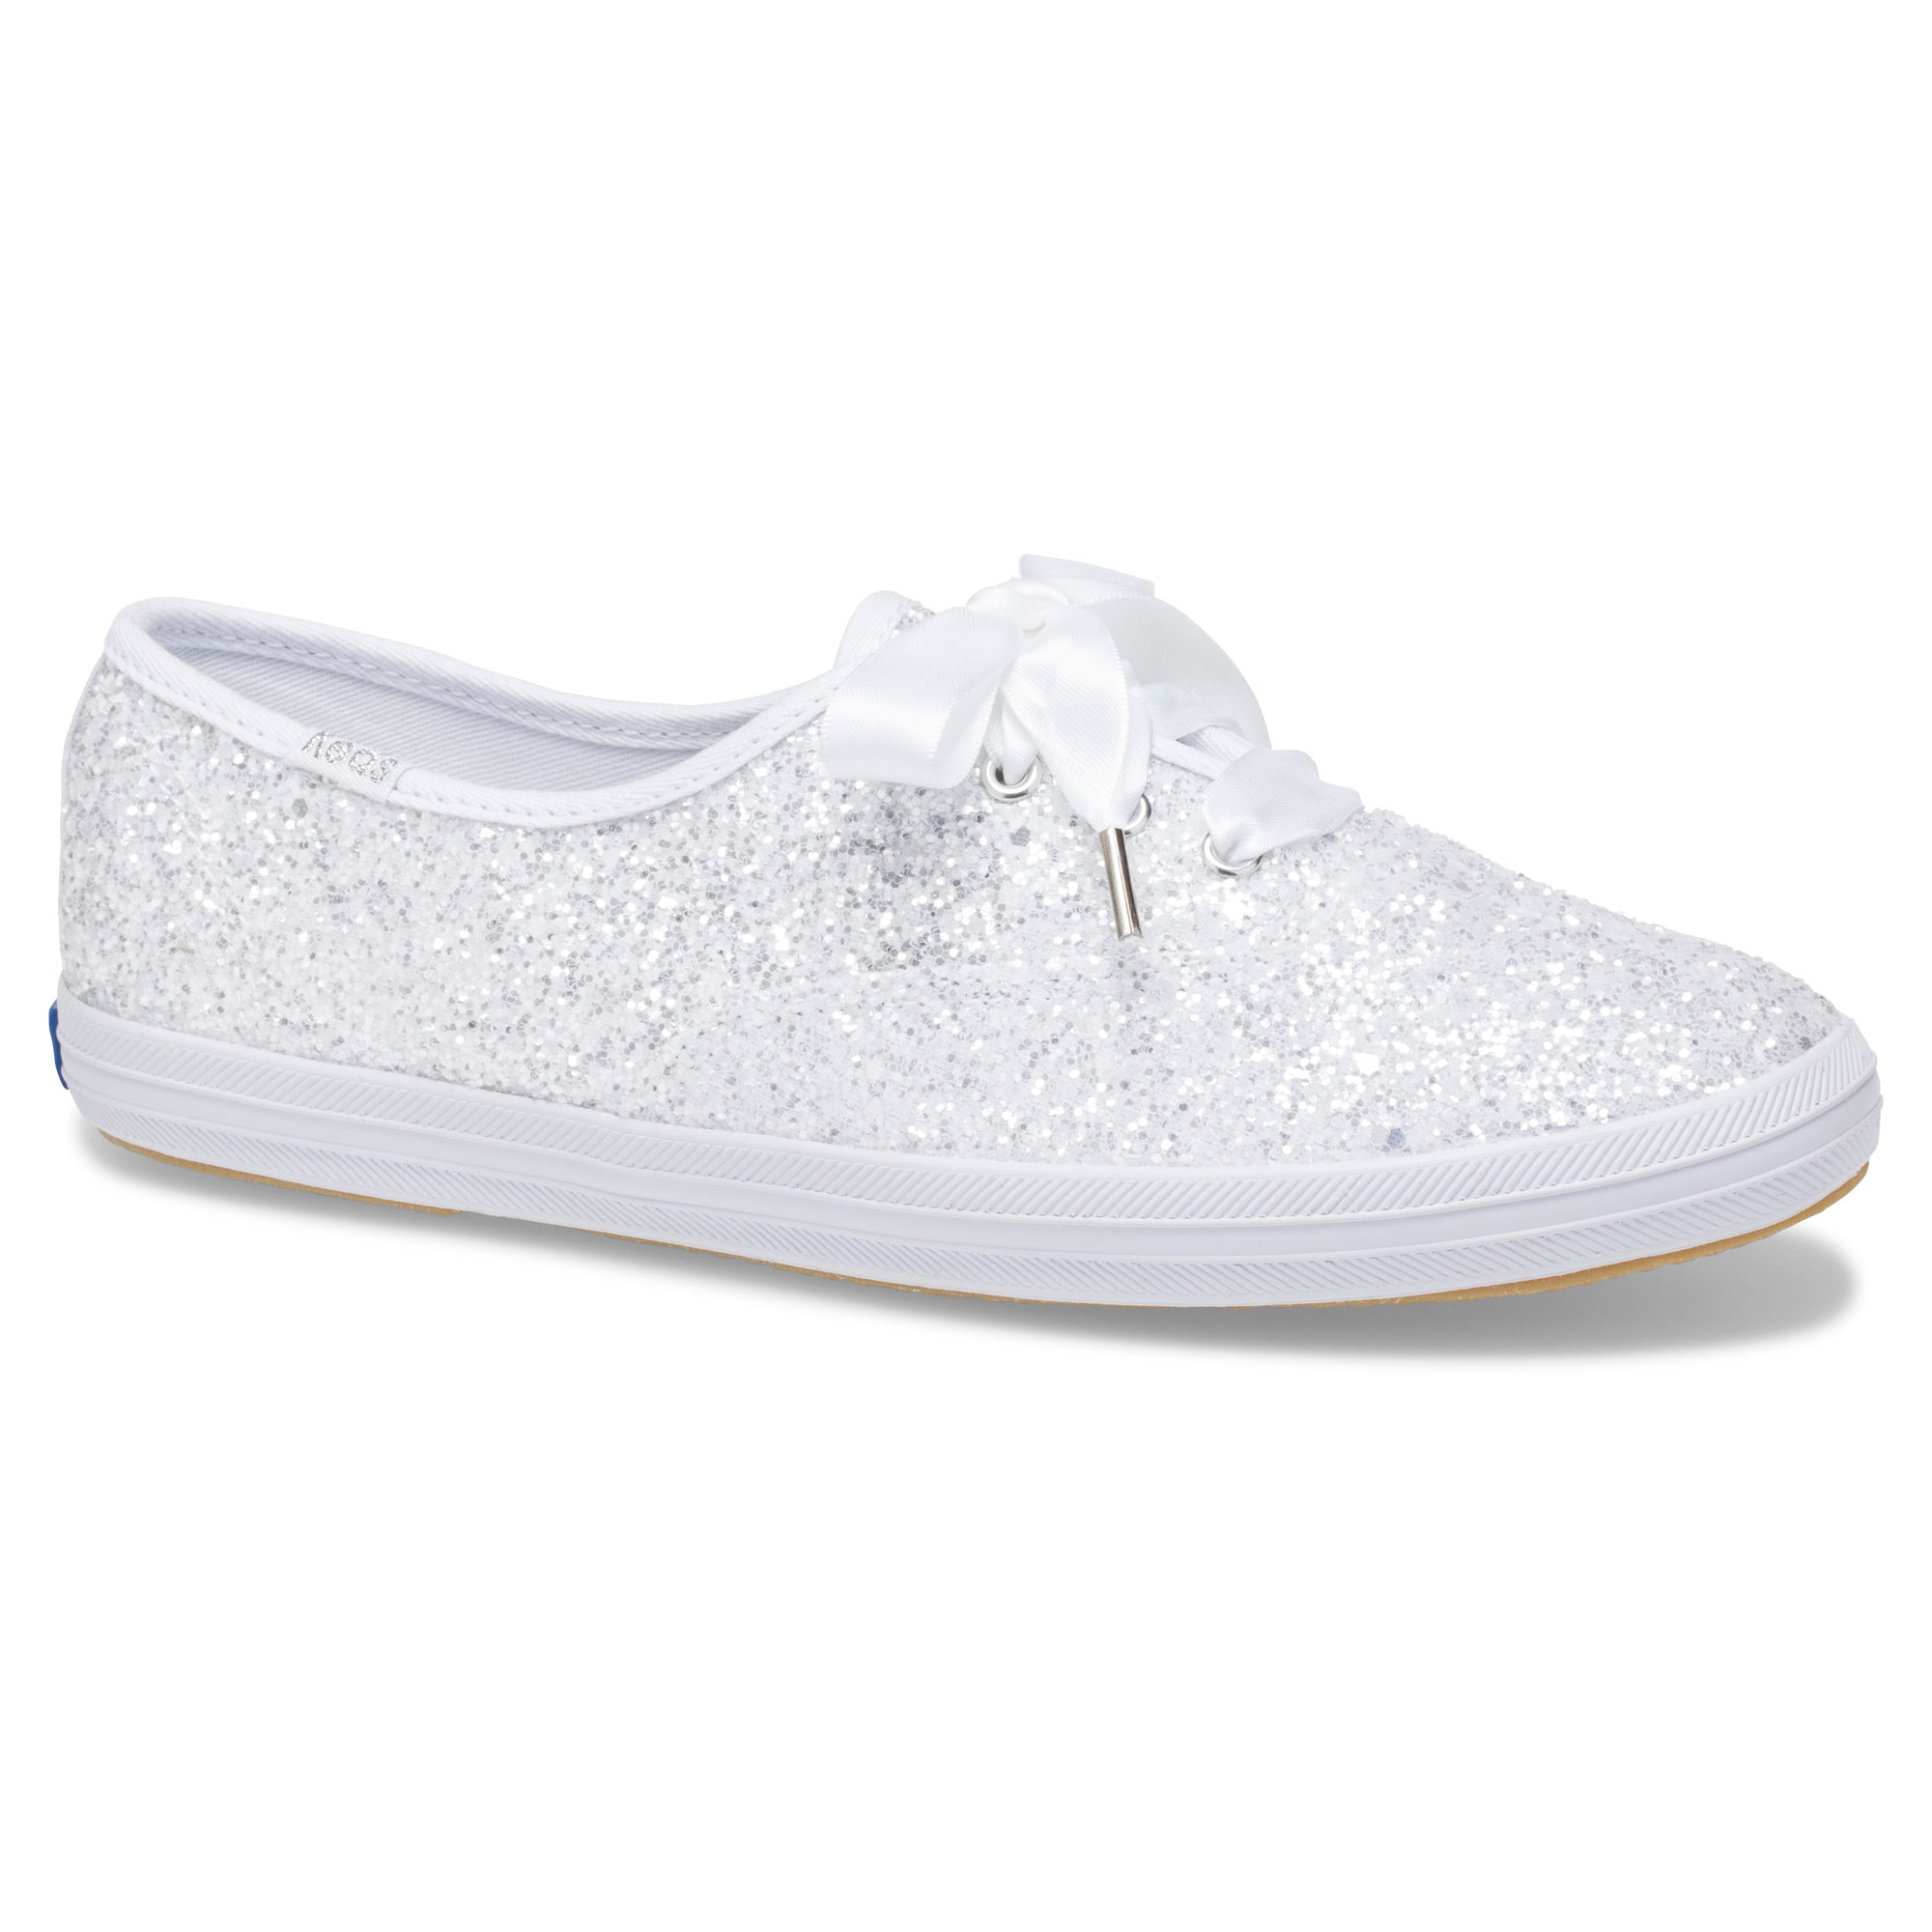 kate spade keds in store